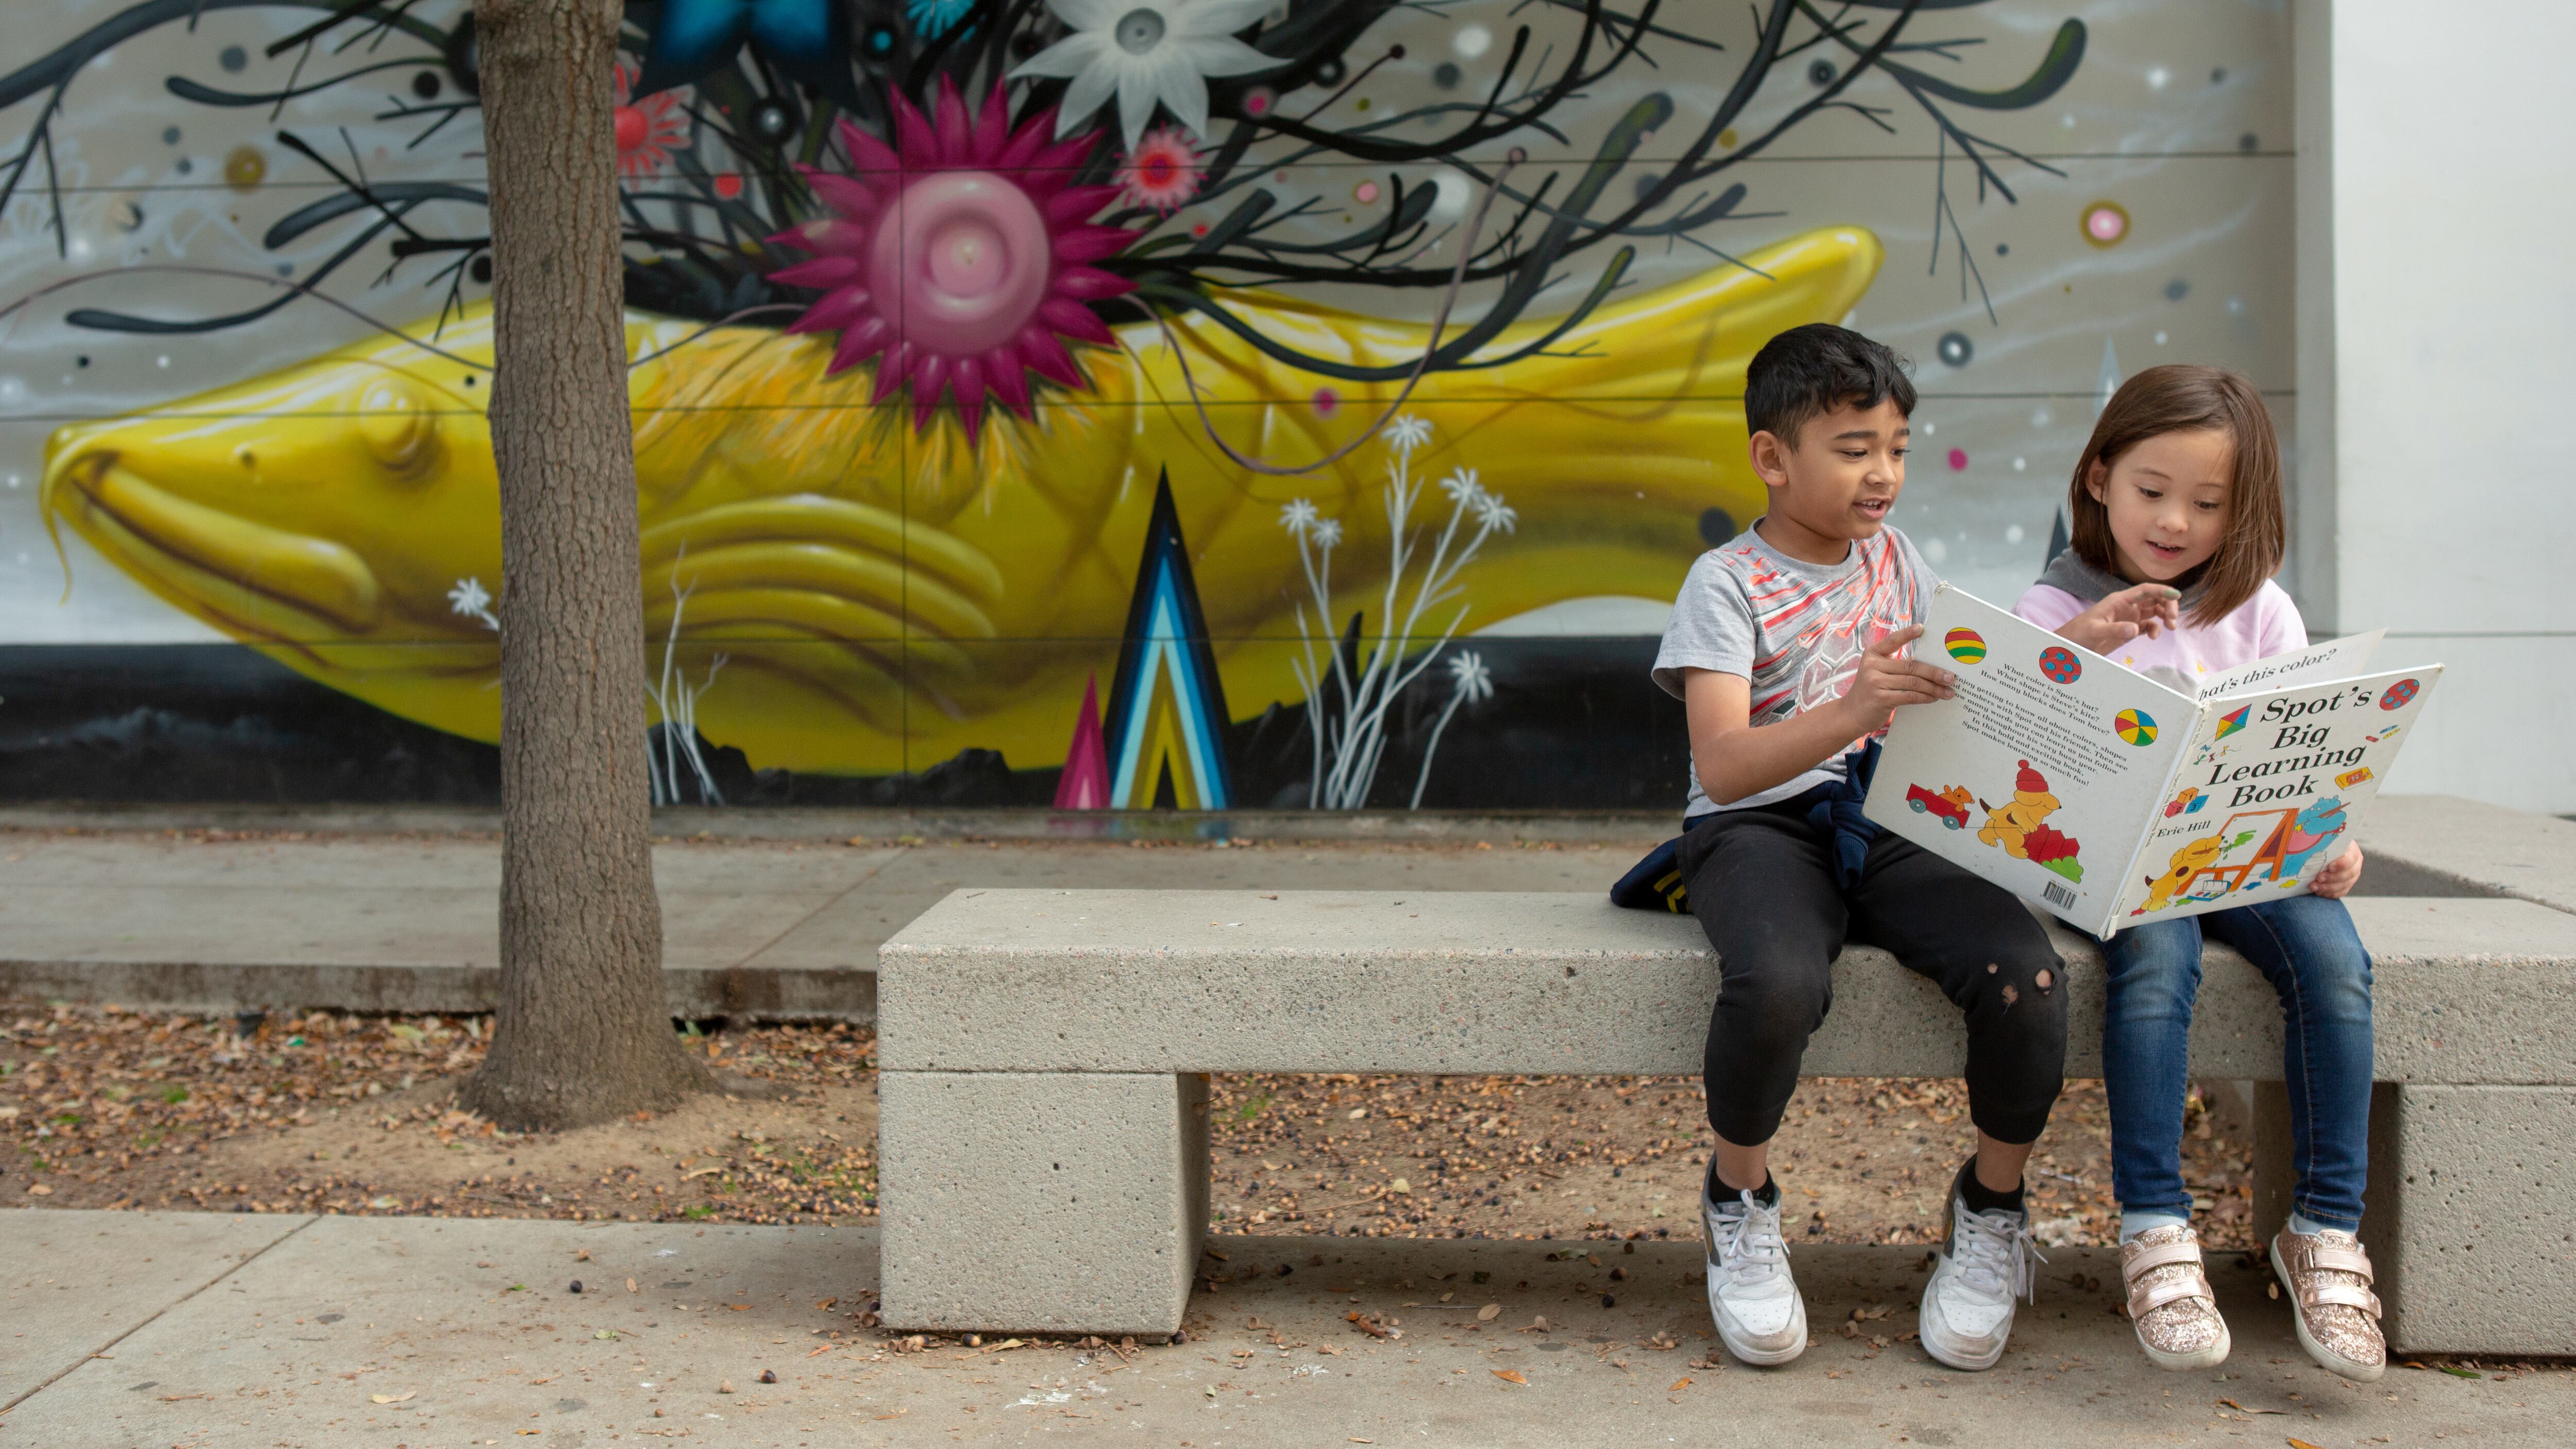 A boy and a girl share a picture book while sitting on a concrete bench in front of a concrete wall and a sculpture of a large yellow fish with a tangle of dark seaweed growing up from its back with blue, magenta and white flowers interspersed.